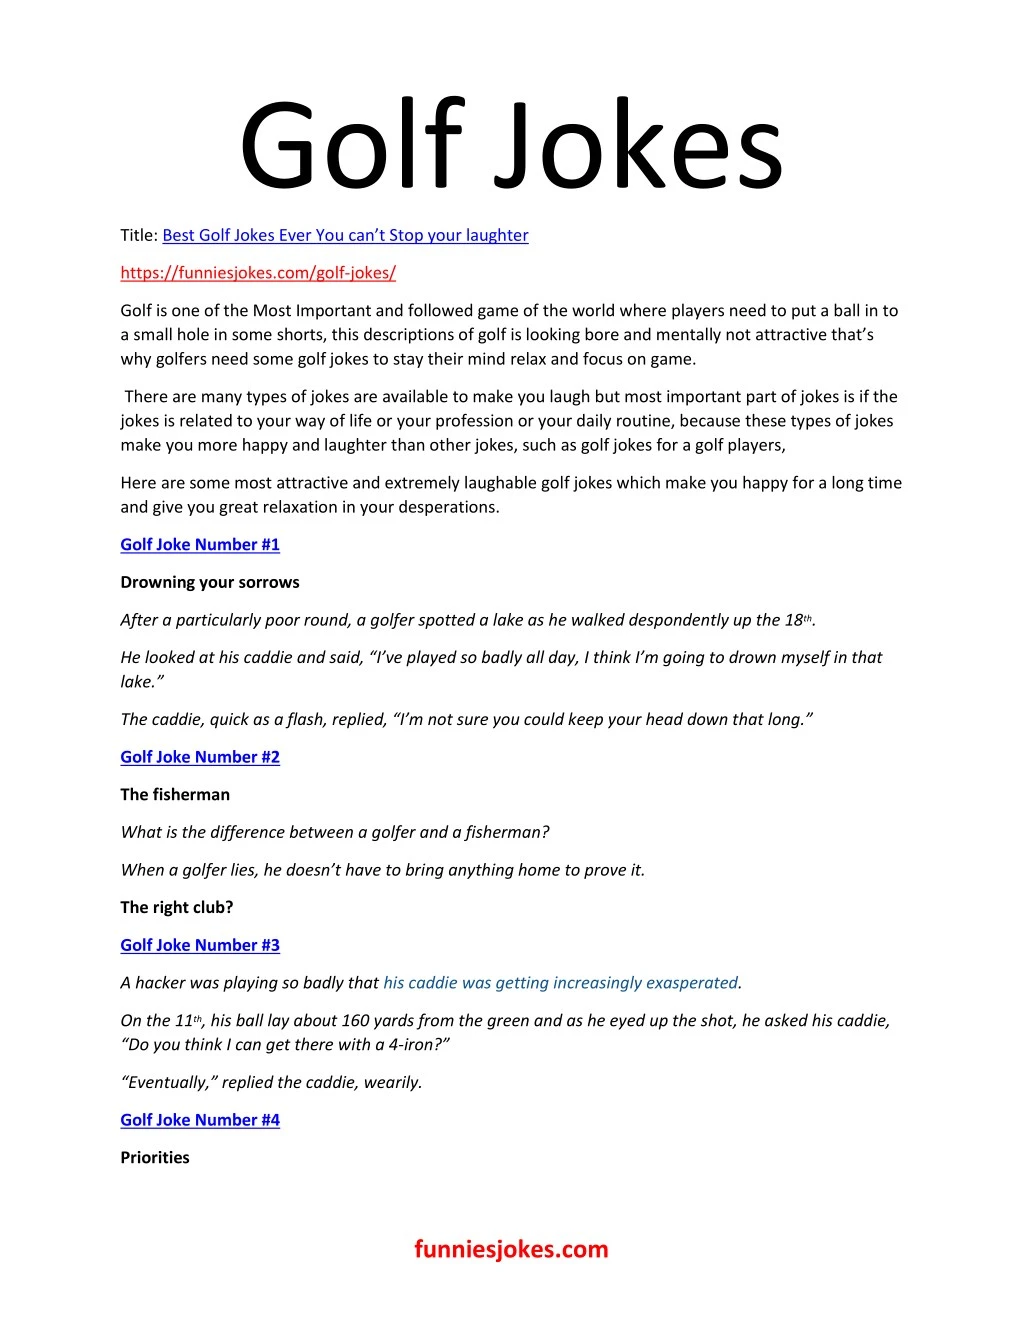 Ppt Best Golf Jokes Ever You Cana T Stop Your Laughter